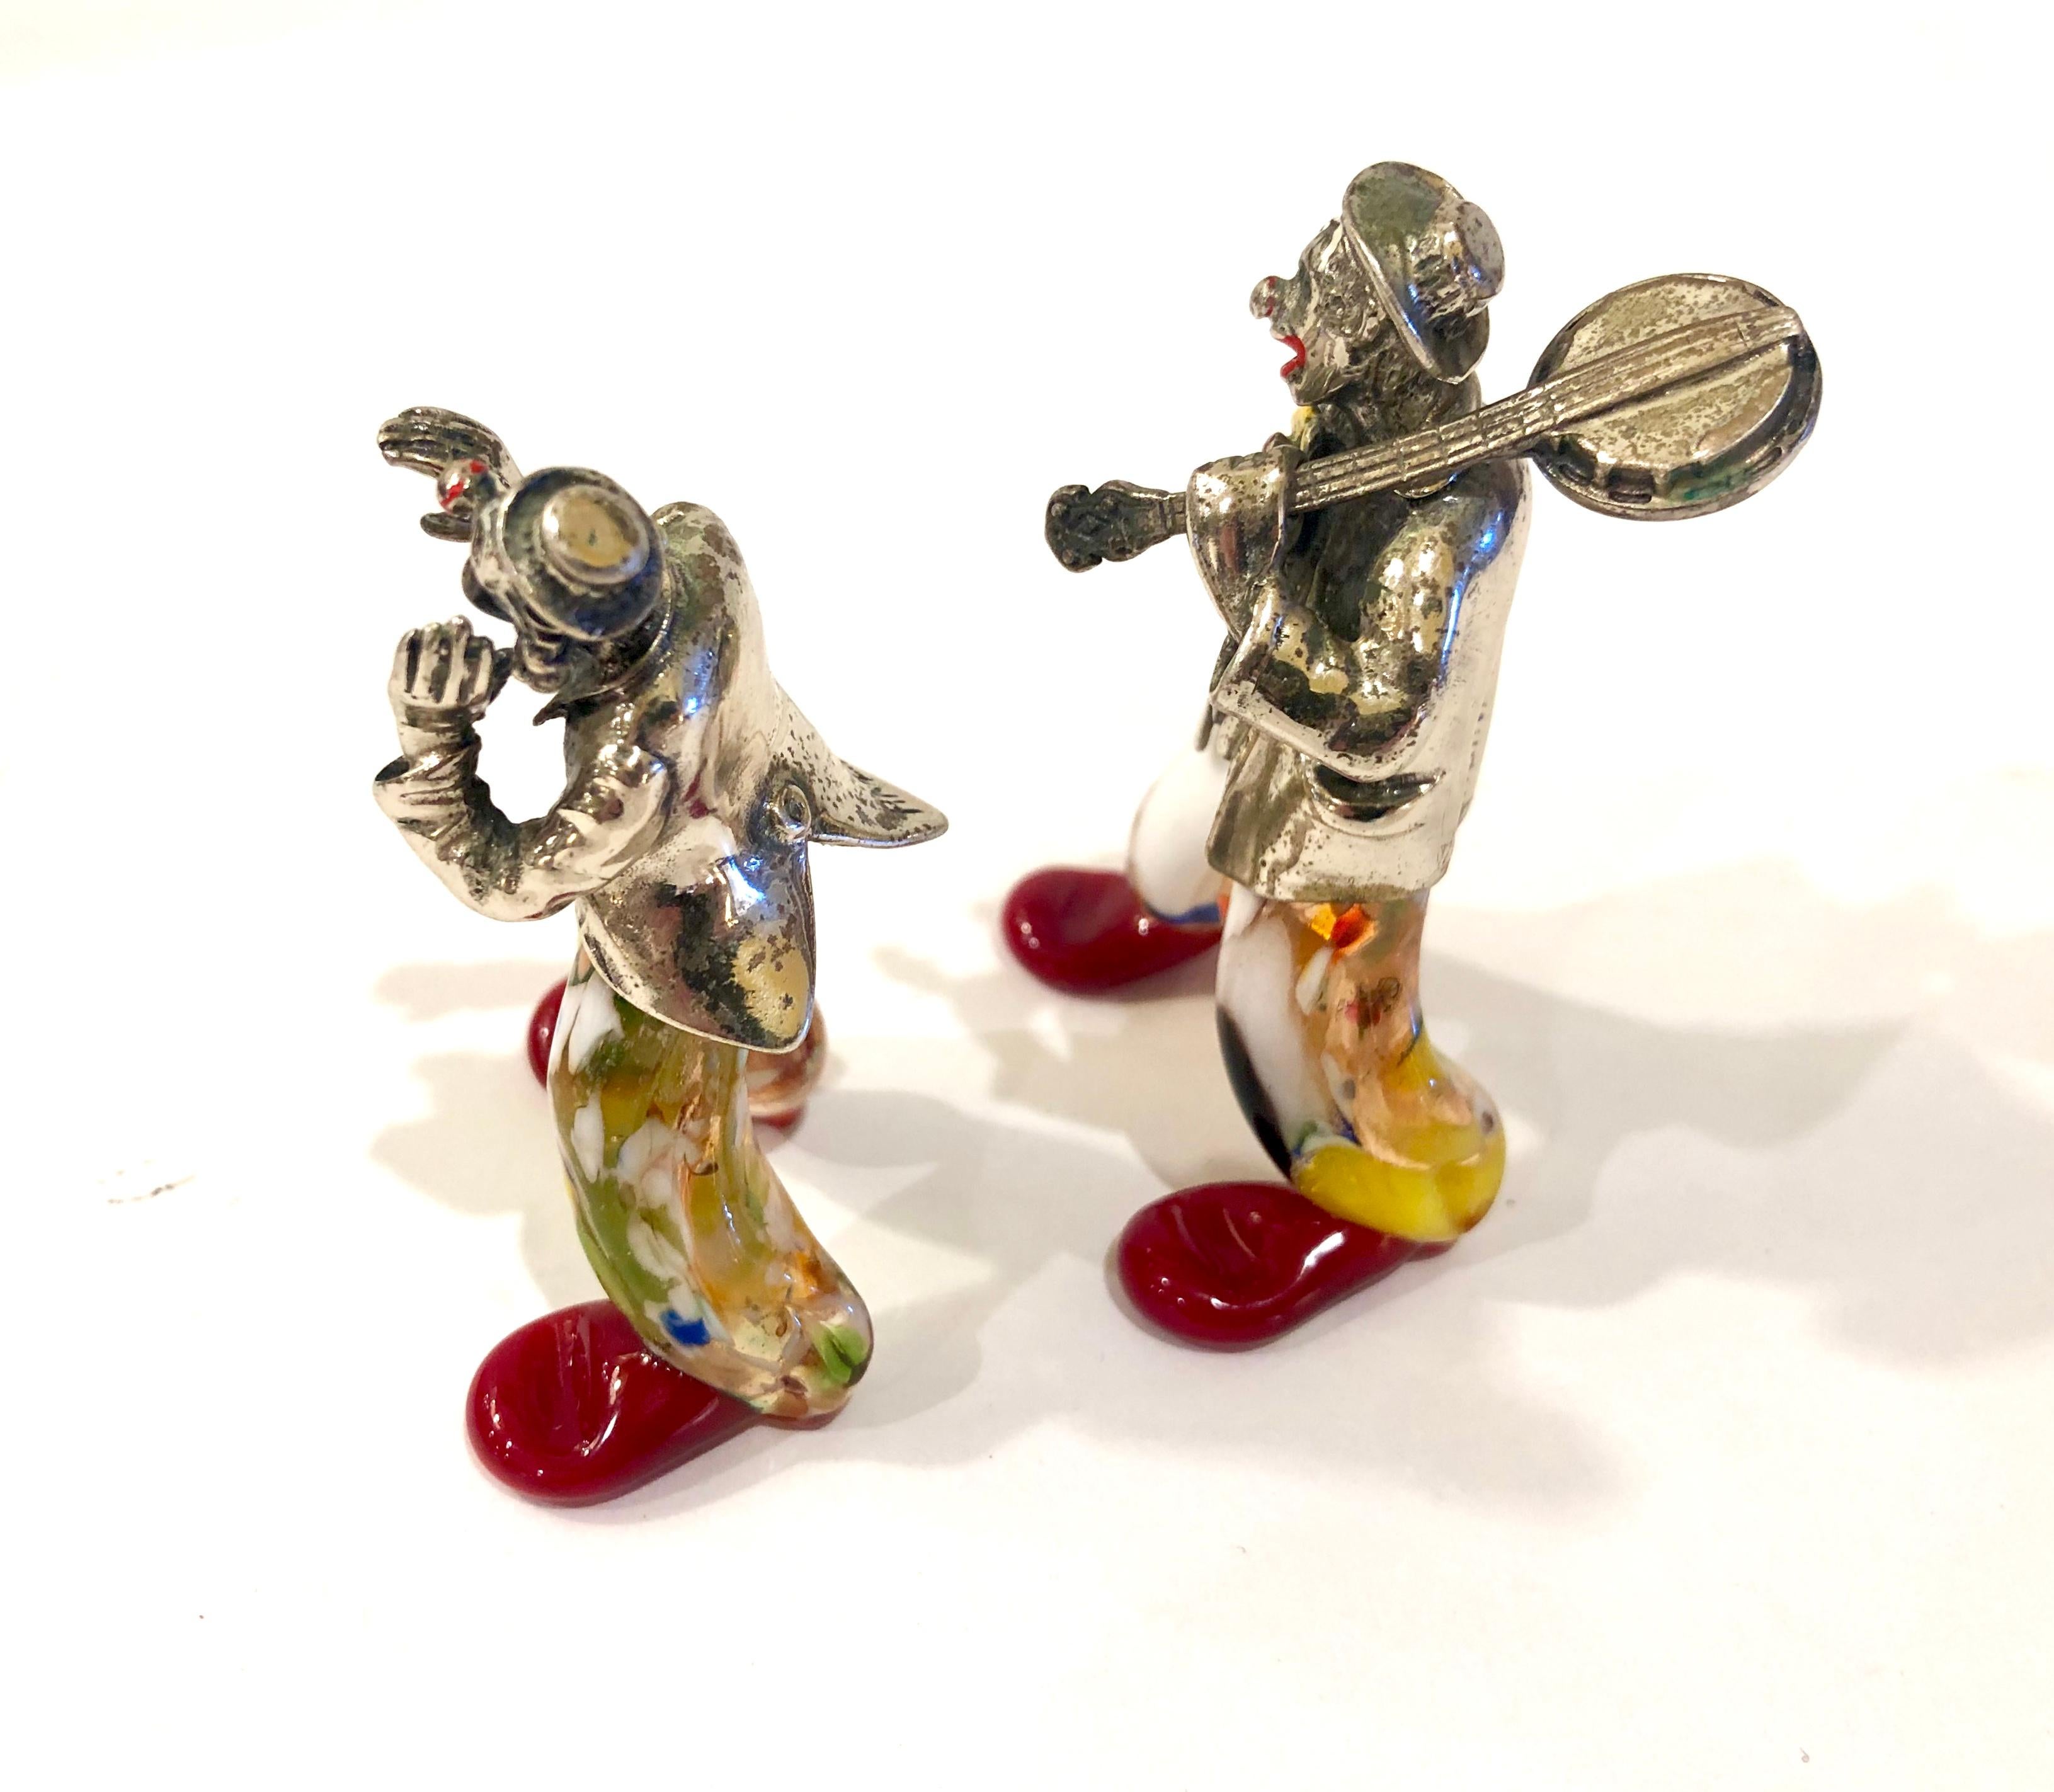 Pair of Murano glass and sterling silver musical clowns by Vittorio Angini, charming set with stunning detail, retain original silver plaque signatures and made in Murano Italy labels.